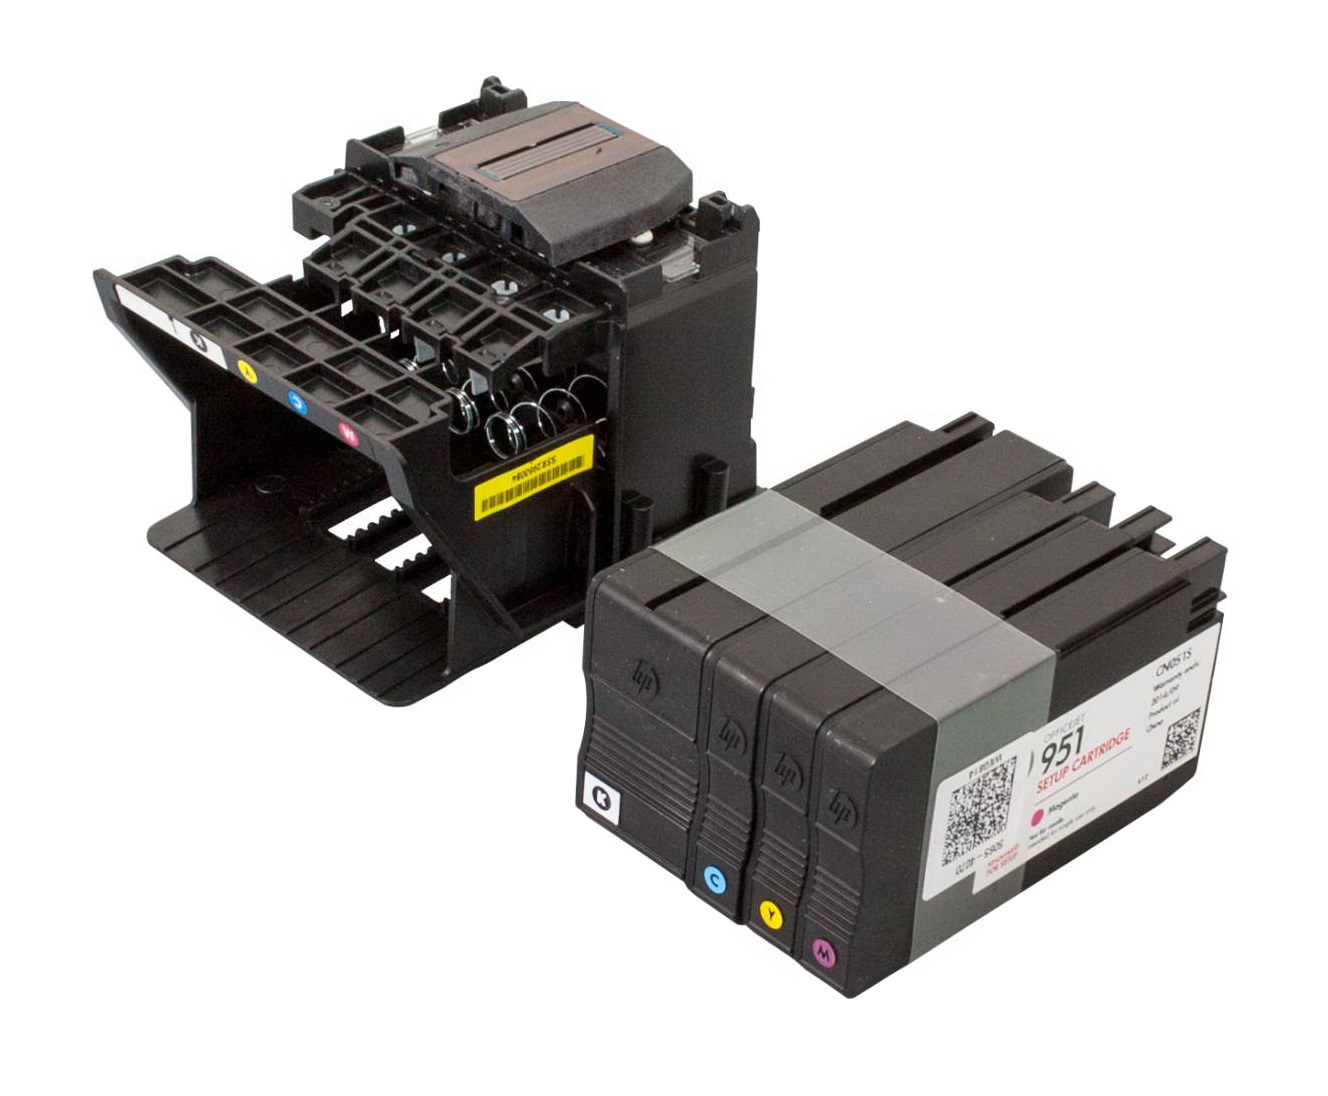 HP CR324A|950XL Printhead for HP OfficeJet Pro 8100/8610/8620